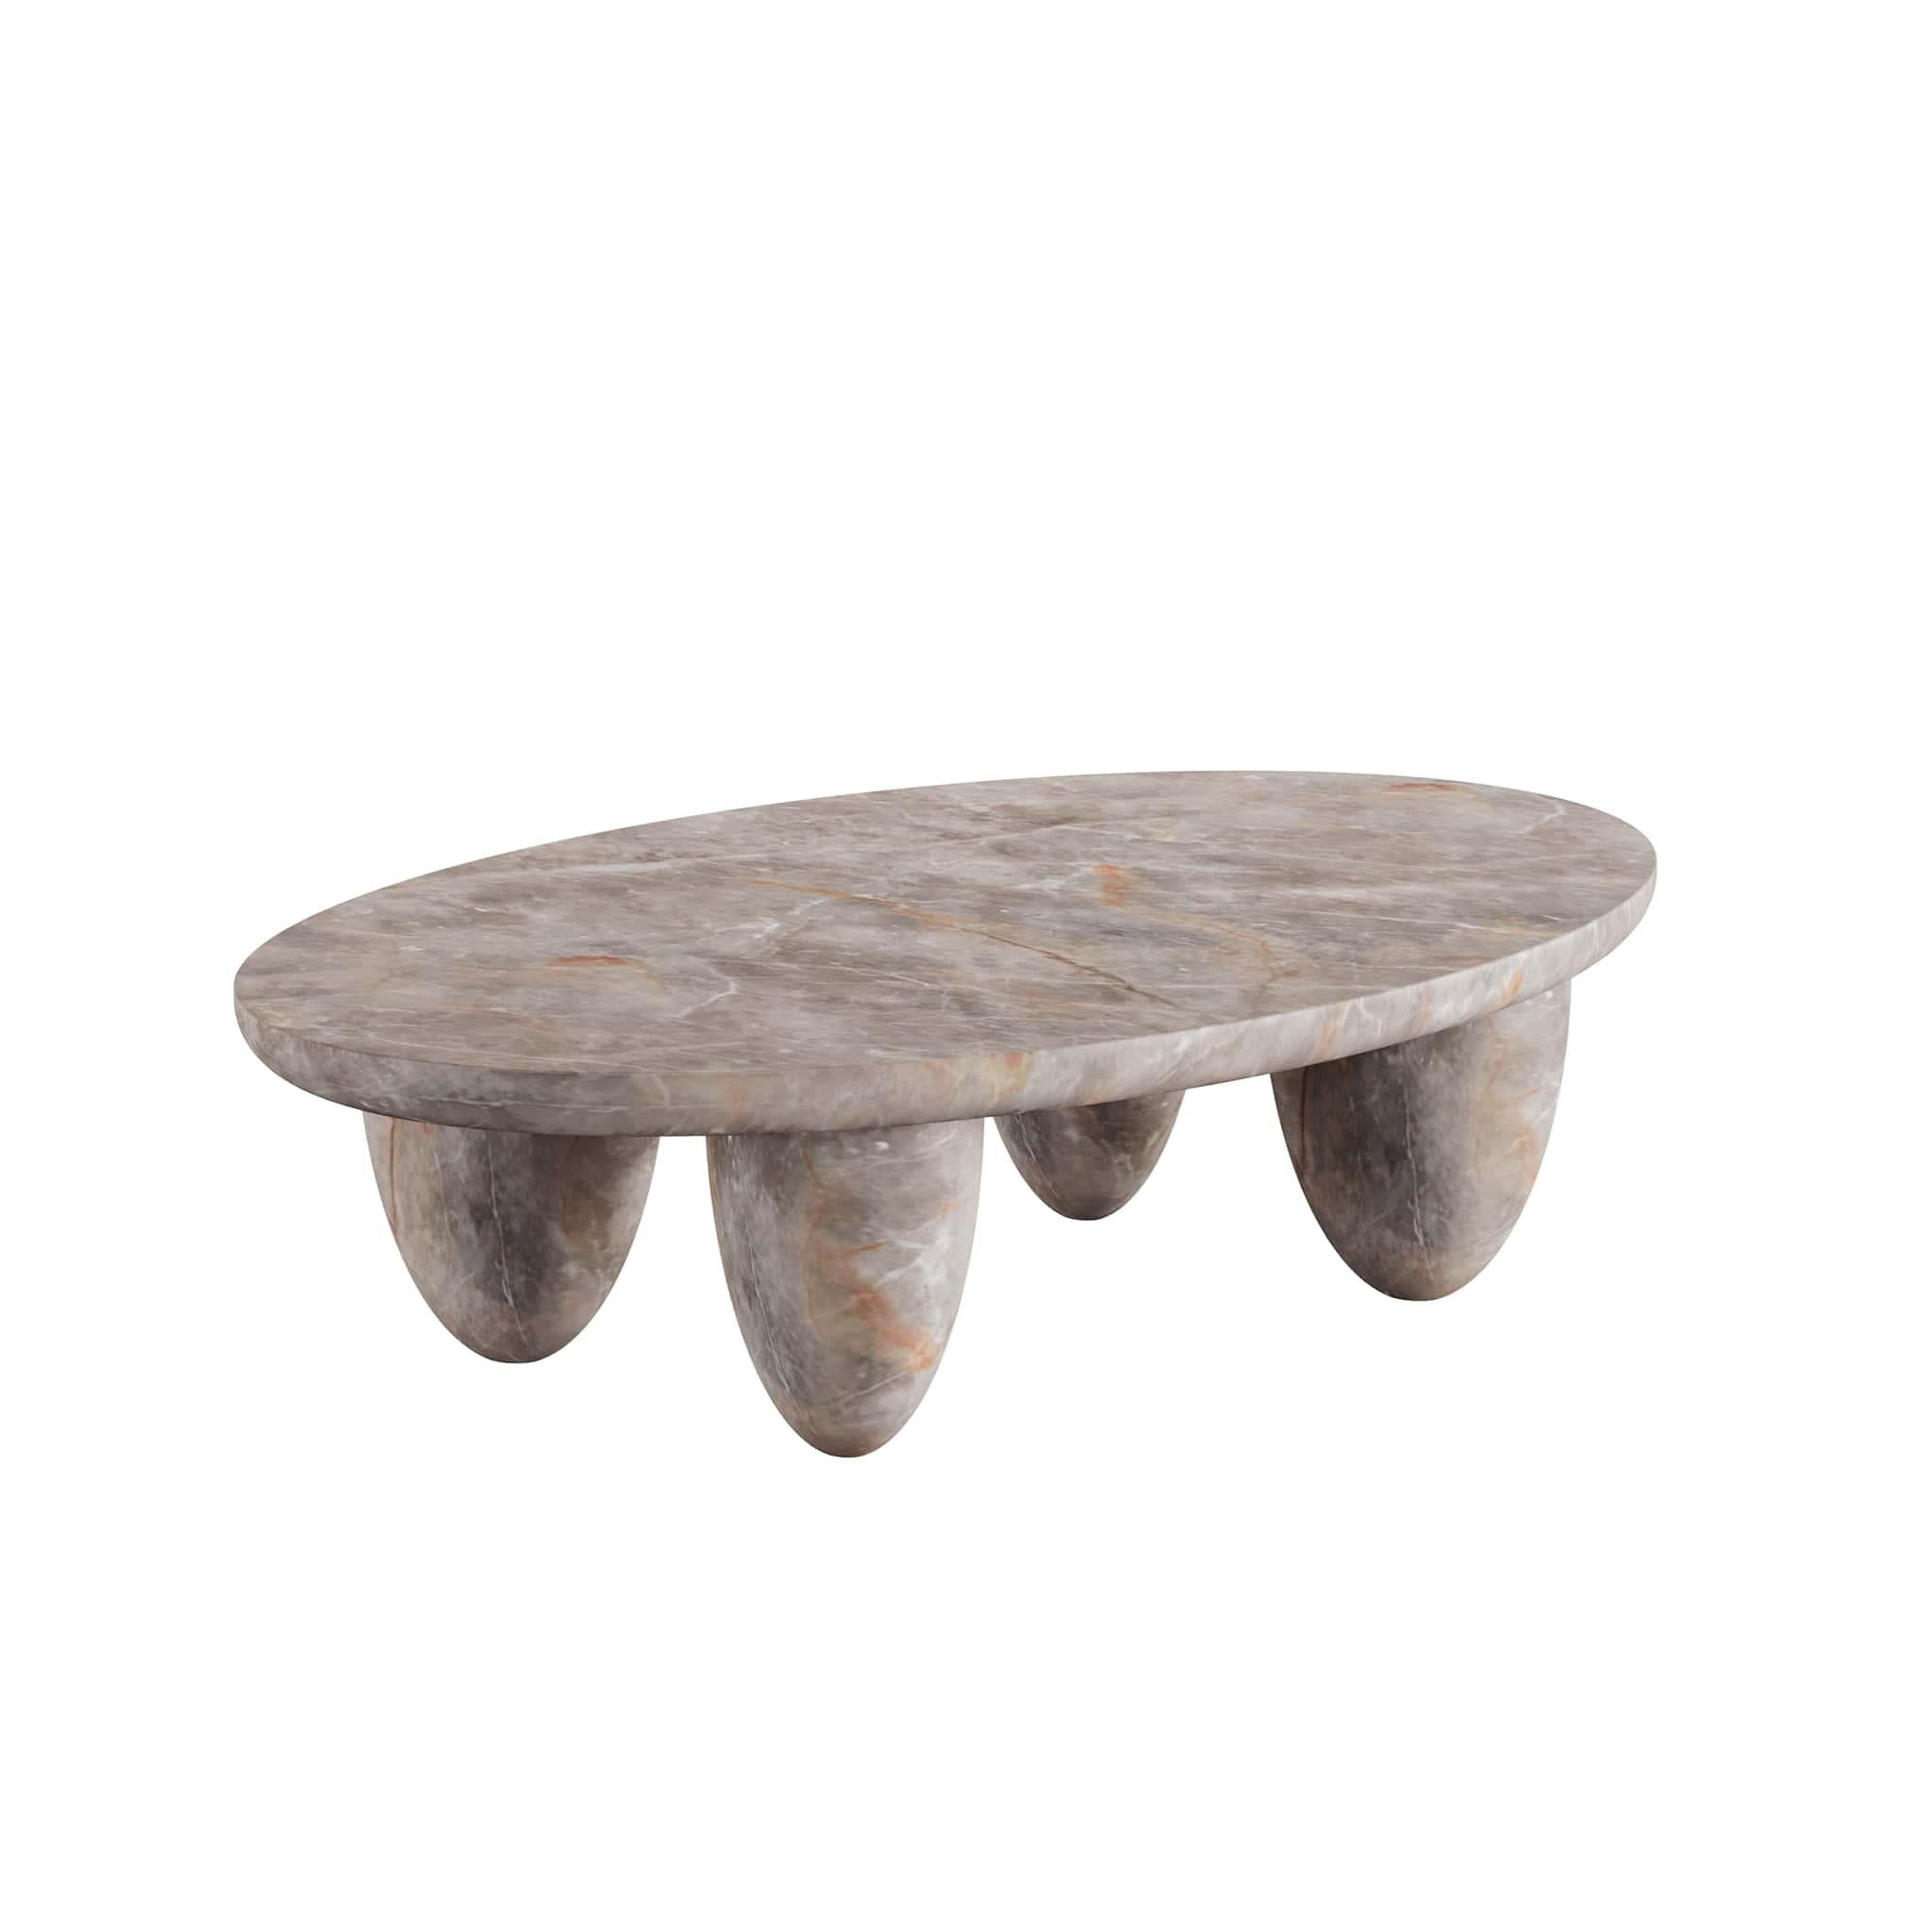 Lunarys Center Table Fior Di Bosco is an outstanding modern design piece. The outdoor center table’s voluptuous anatomy and soft texture are perfect for indoor or outdoor projects. Defined by a refined and elegant silhouette, this large coffee table